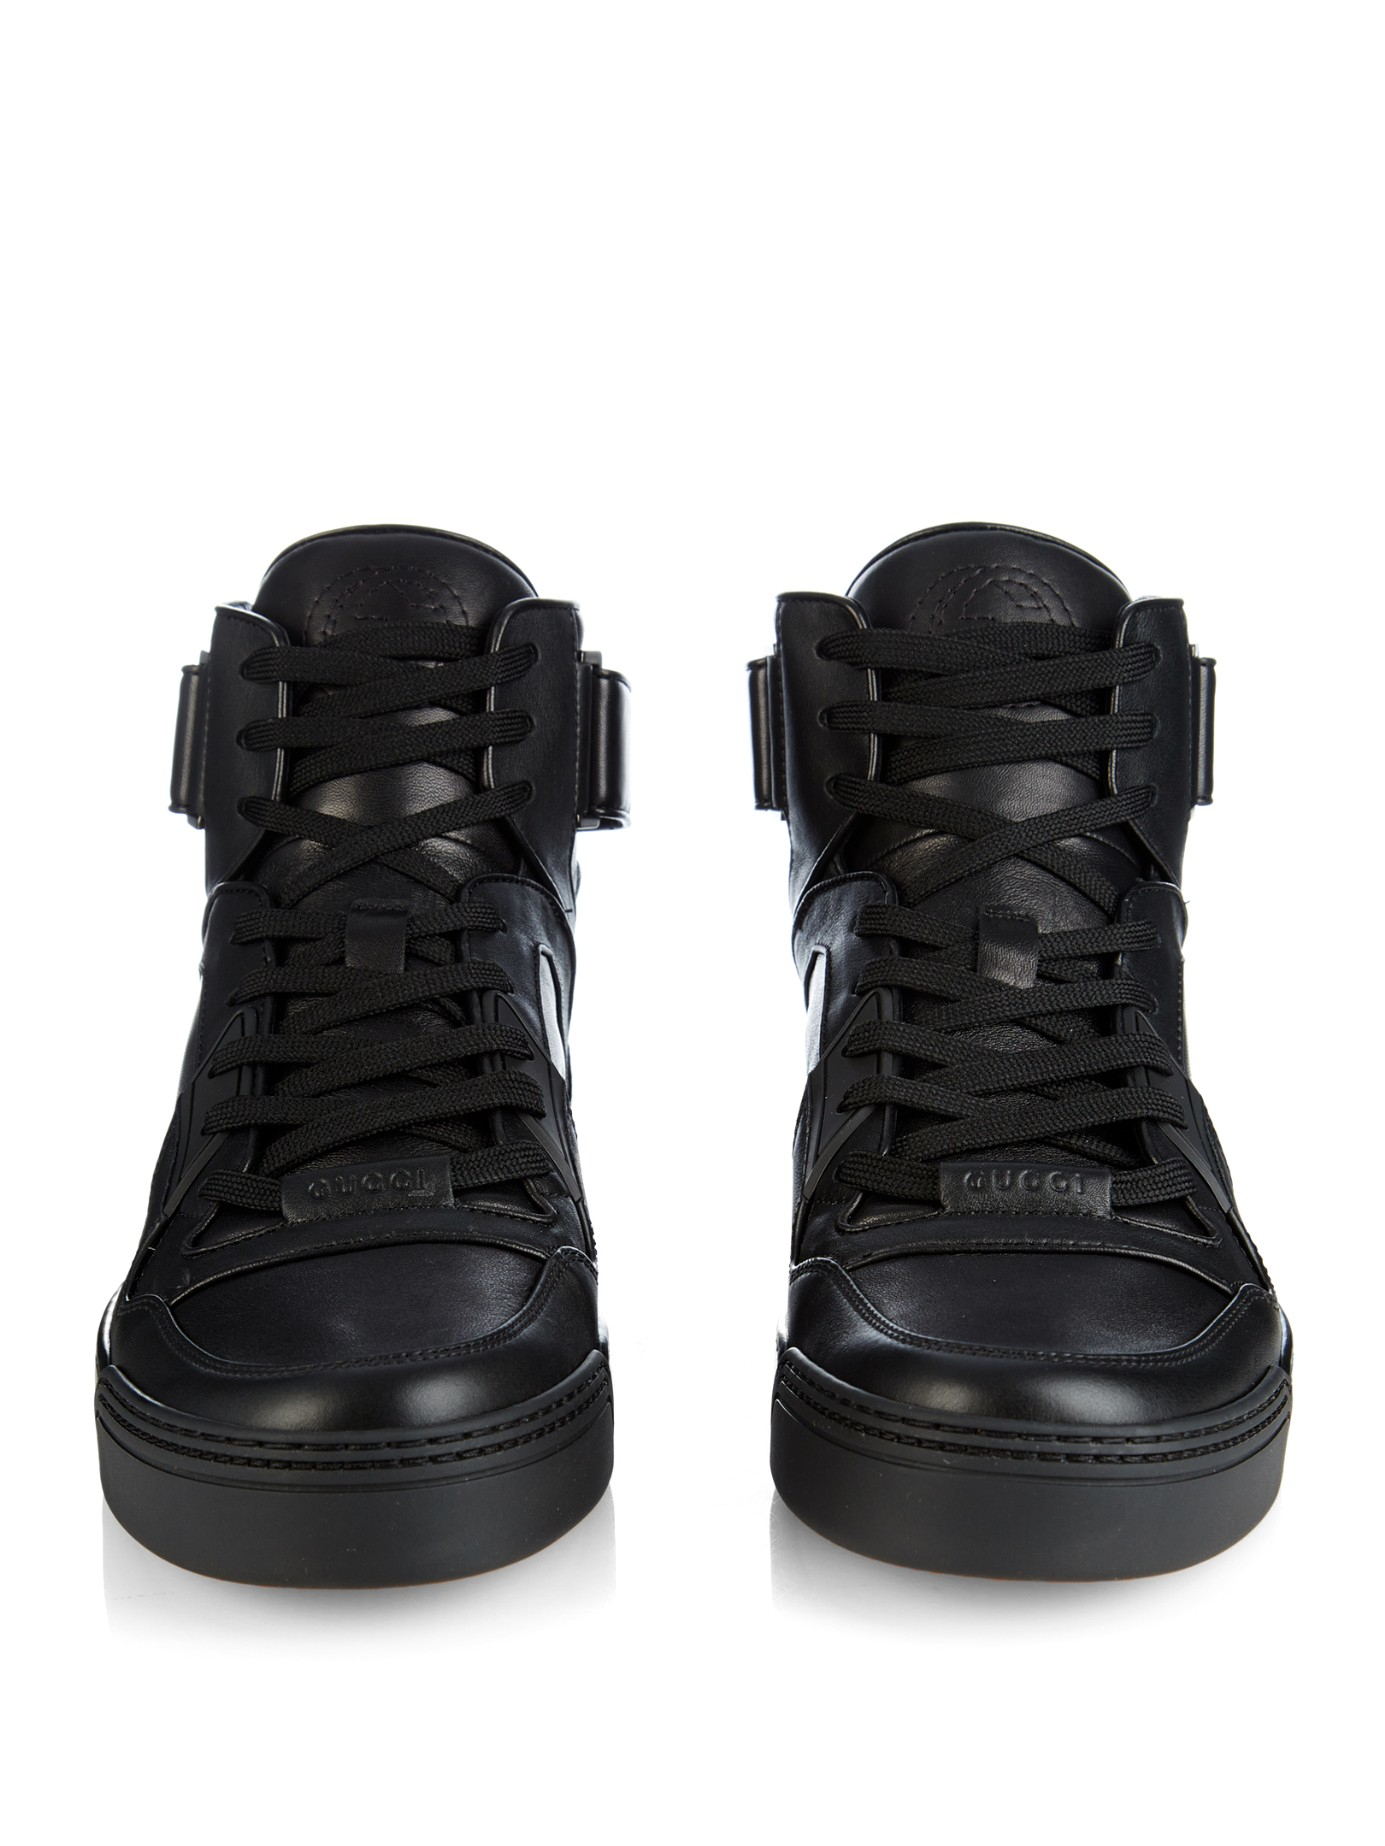 Gucci High-Top Leather Sneakers in Black for Men - Lyst